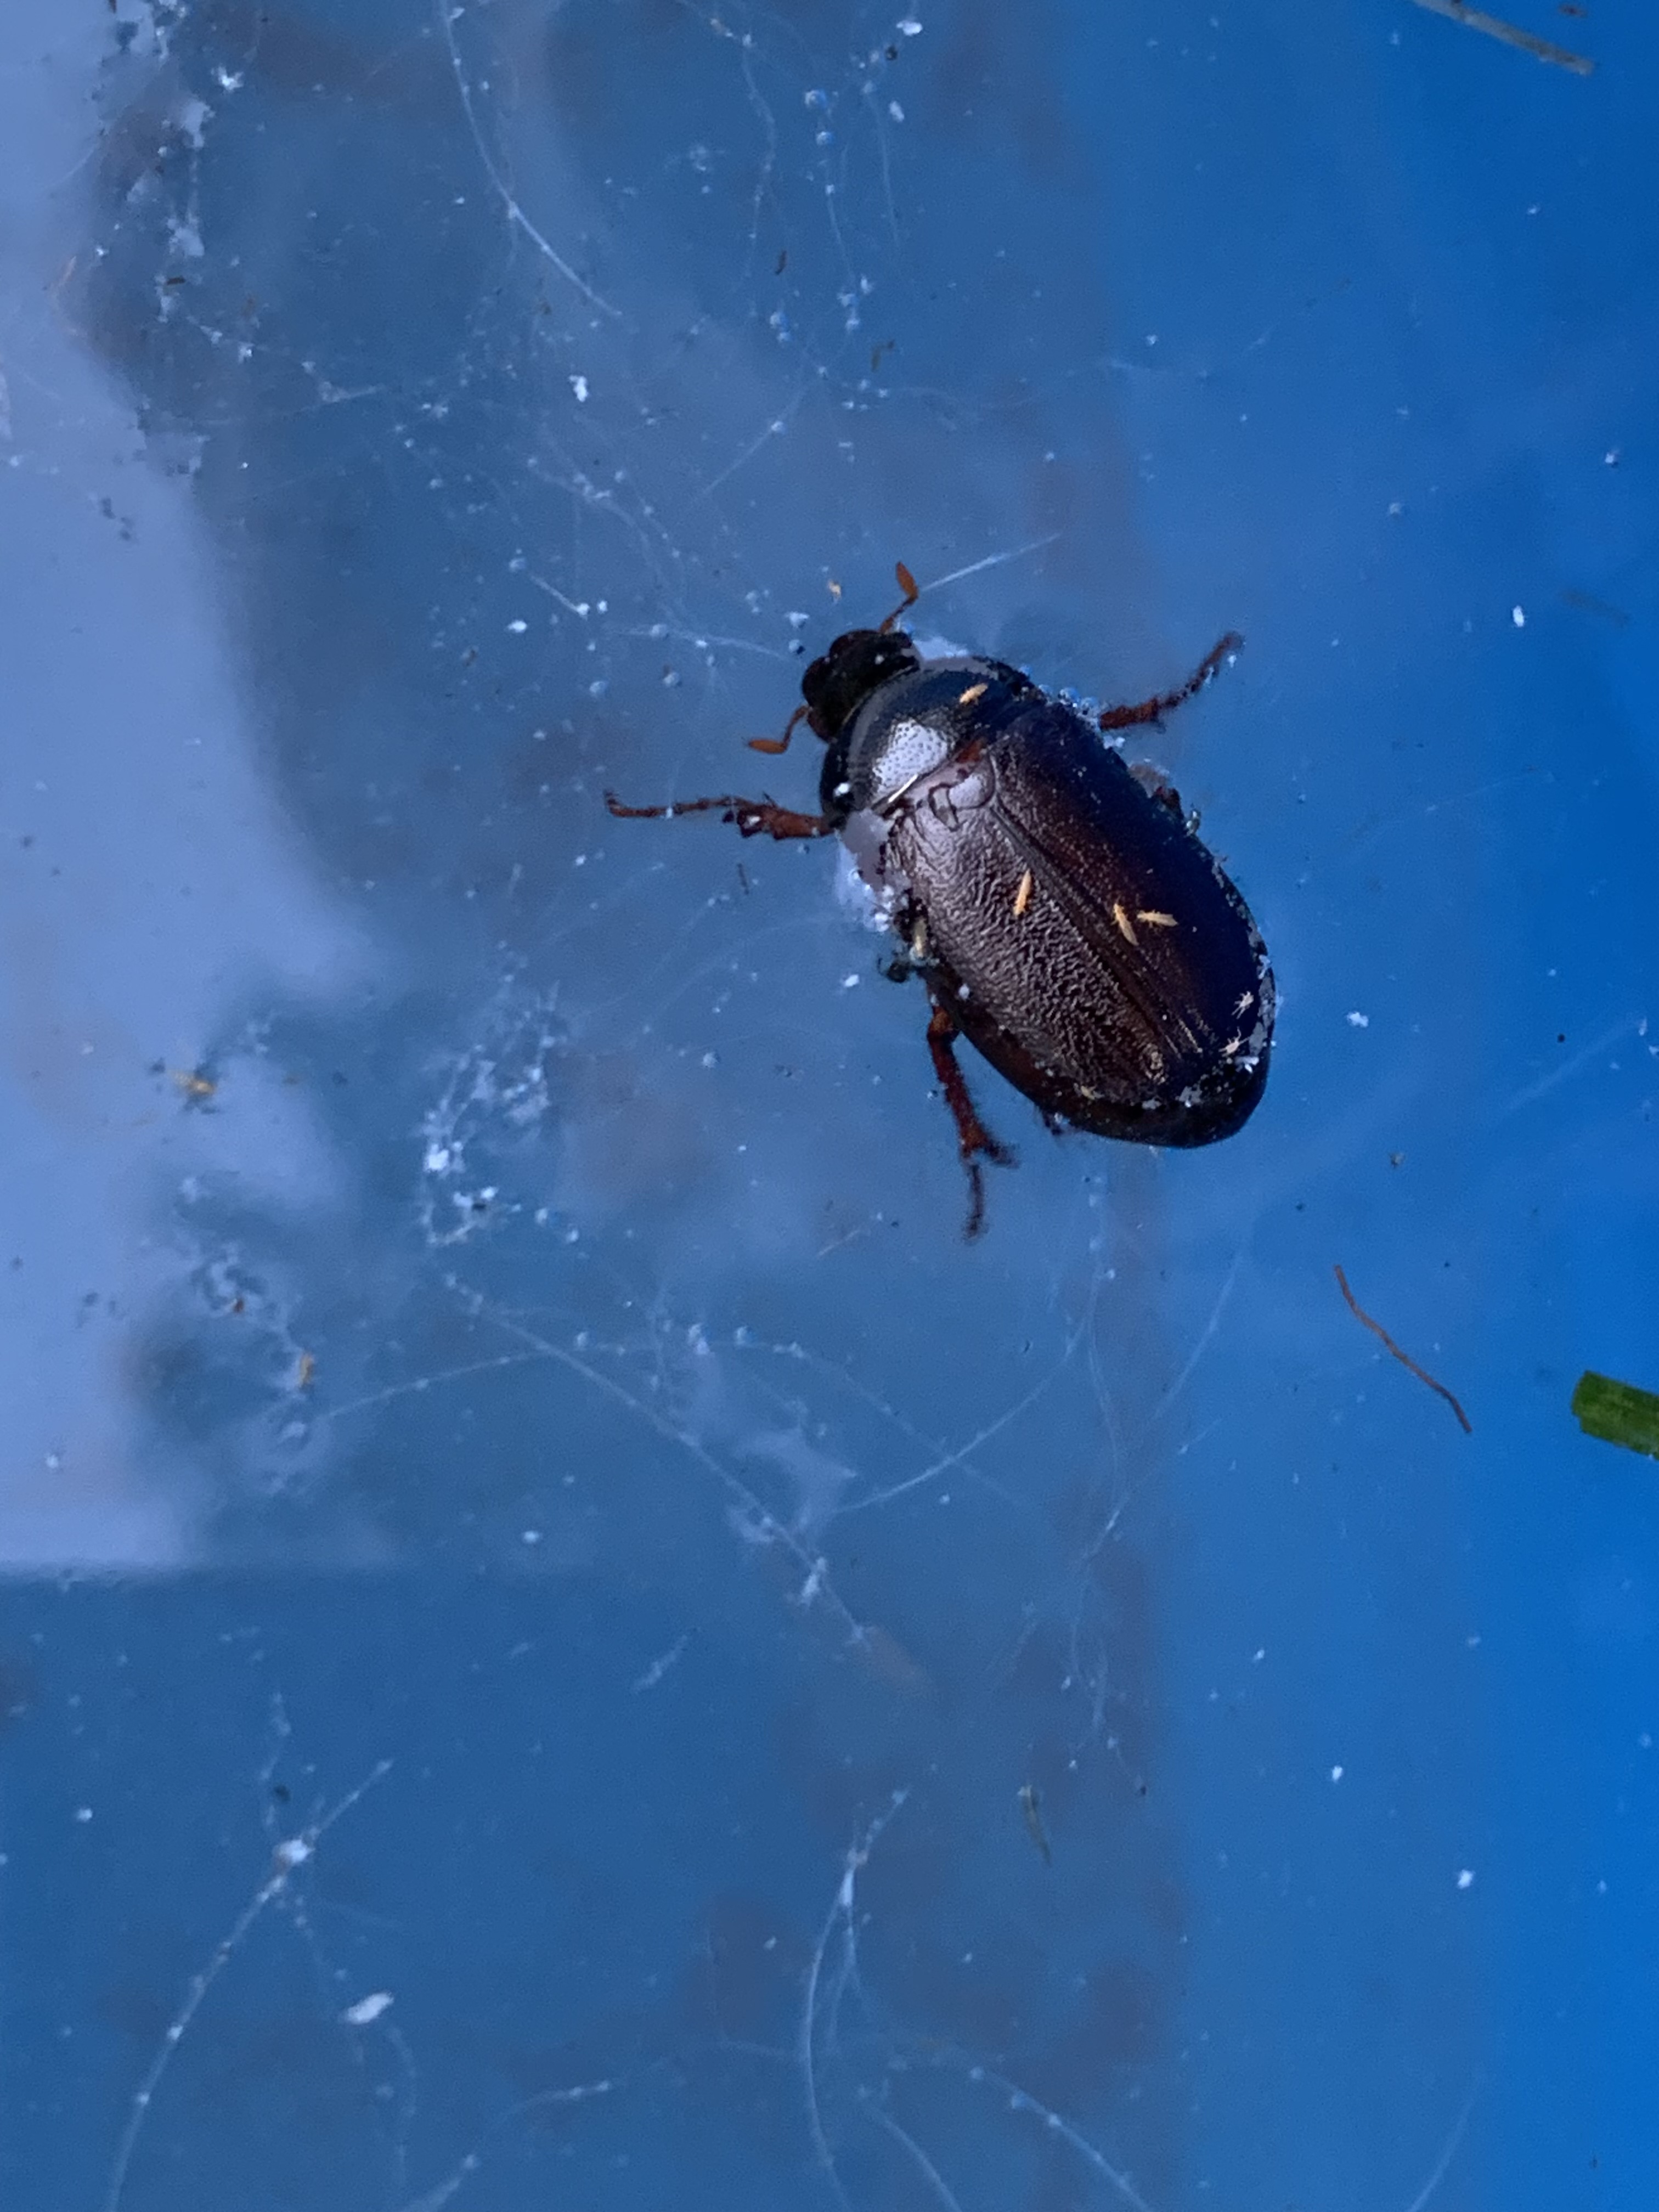 A hapless June bug swims in a blue wading pool, just before the dog eats it.